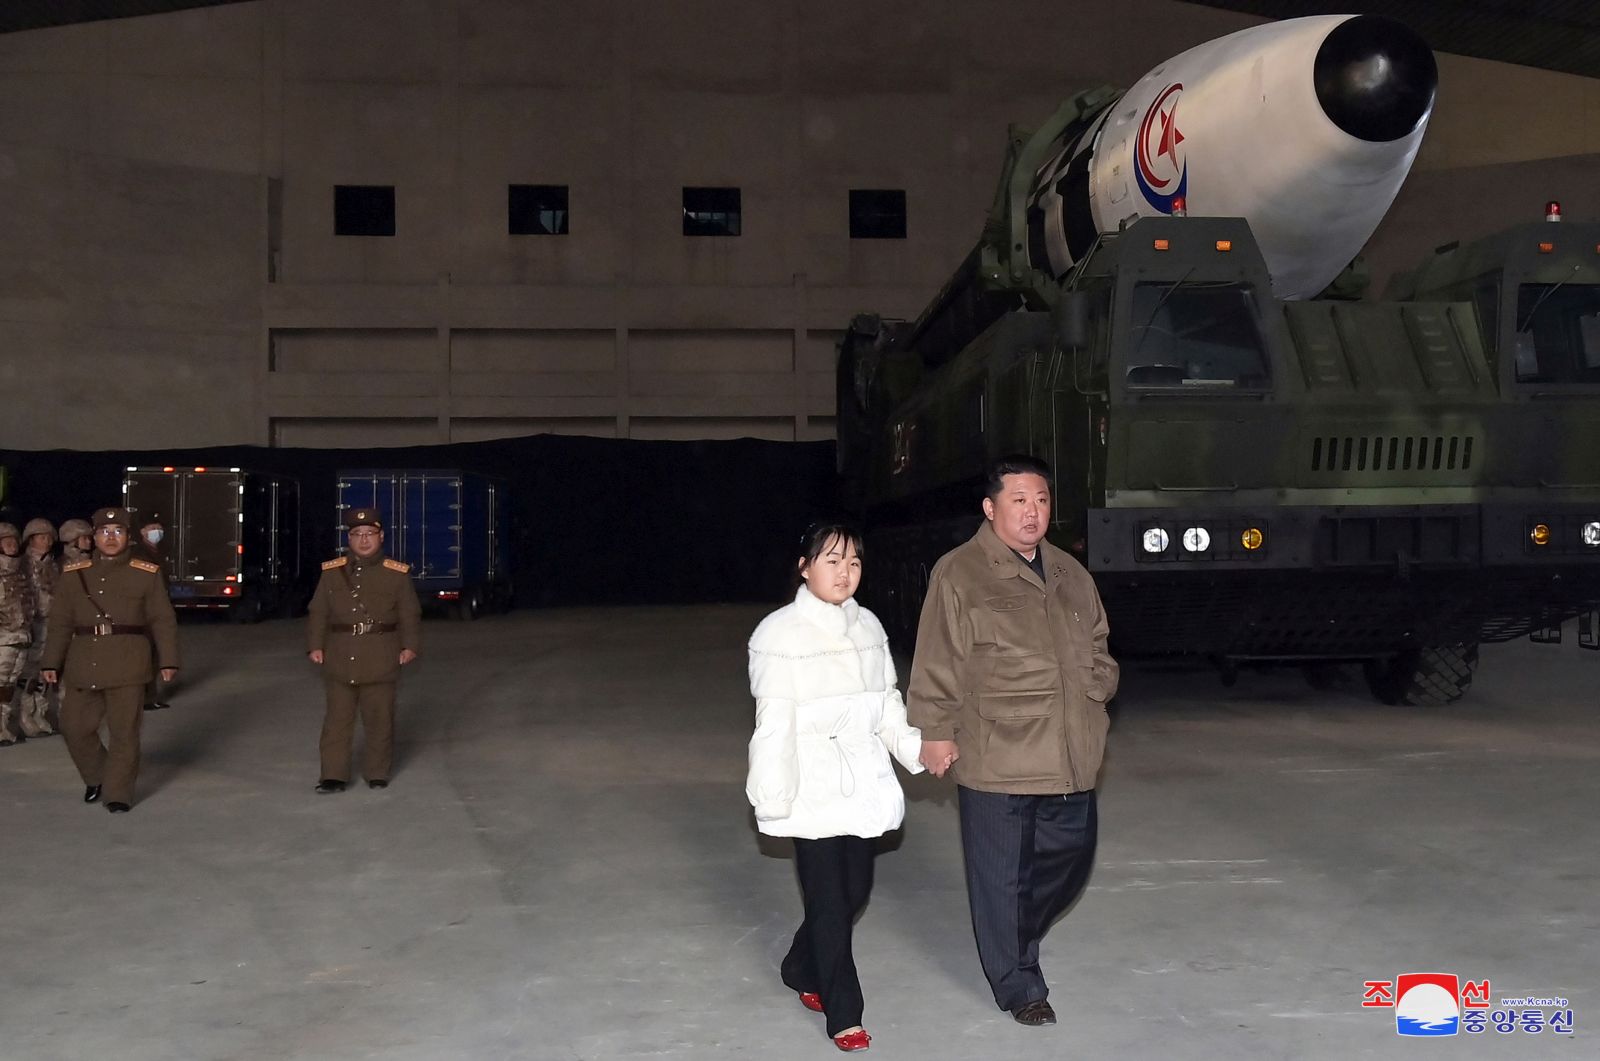 epa10313517 A photo released by the official North Korean Central News Agency (KCNA) shows North Korean leader Kim Jong-Un, accompanied by his daughter during the test firing of a new type of intercontinental ballistic missile (ICBM) Hwasongpho-17 at Pyongyang International airport in Pyongyang, North Korea, 18 November 2022 (Issued on 19 November 2022). According to KCNA, the missile traveled up to a maximum altitude of 6,040.9 kilometres and flew a distance of 999.2 kilometres for 4,135s before landing in open waters of the East Sea.

Thank you  EPA/KCNA   EDITORIAL USE ONLY